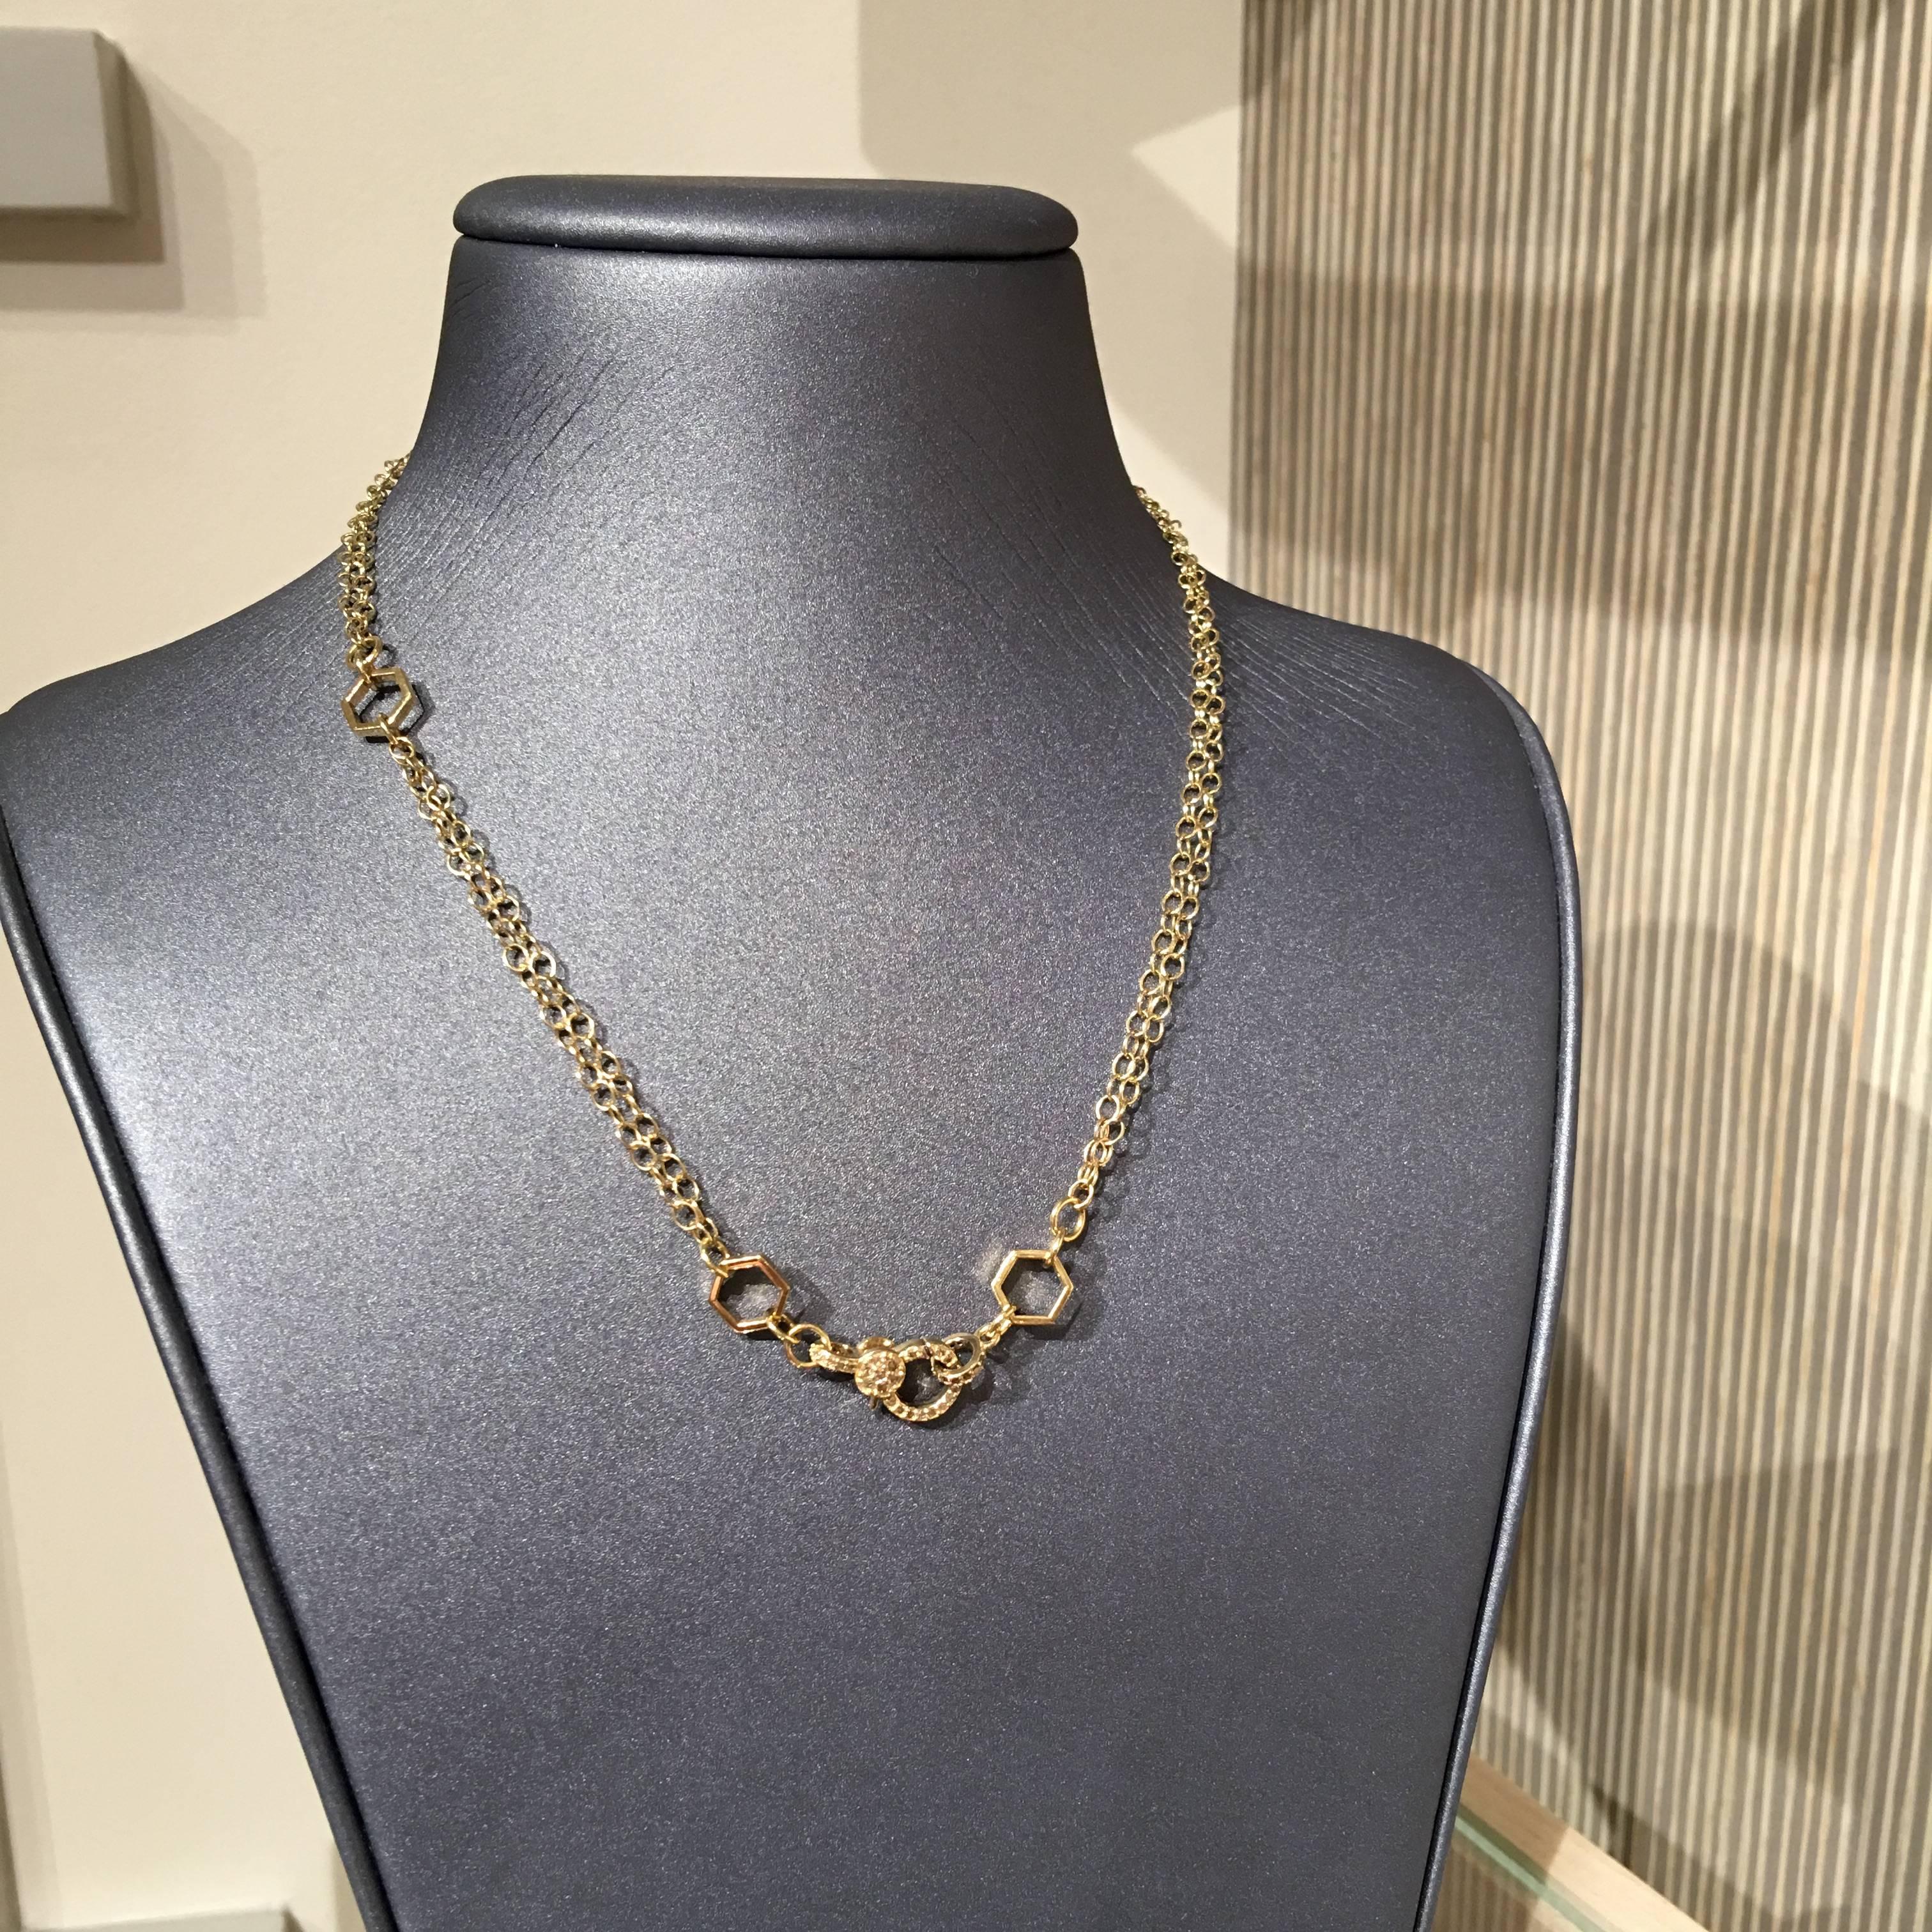 Multi-functional Necklace handcrafted by jewelry designer Fern Freeman in New York in 14k yellow gold featuring an ornamental double-sided clasp embedded with 0.28 total carats of diamonds and accented with three open hexagonal elements that allow